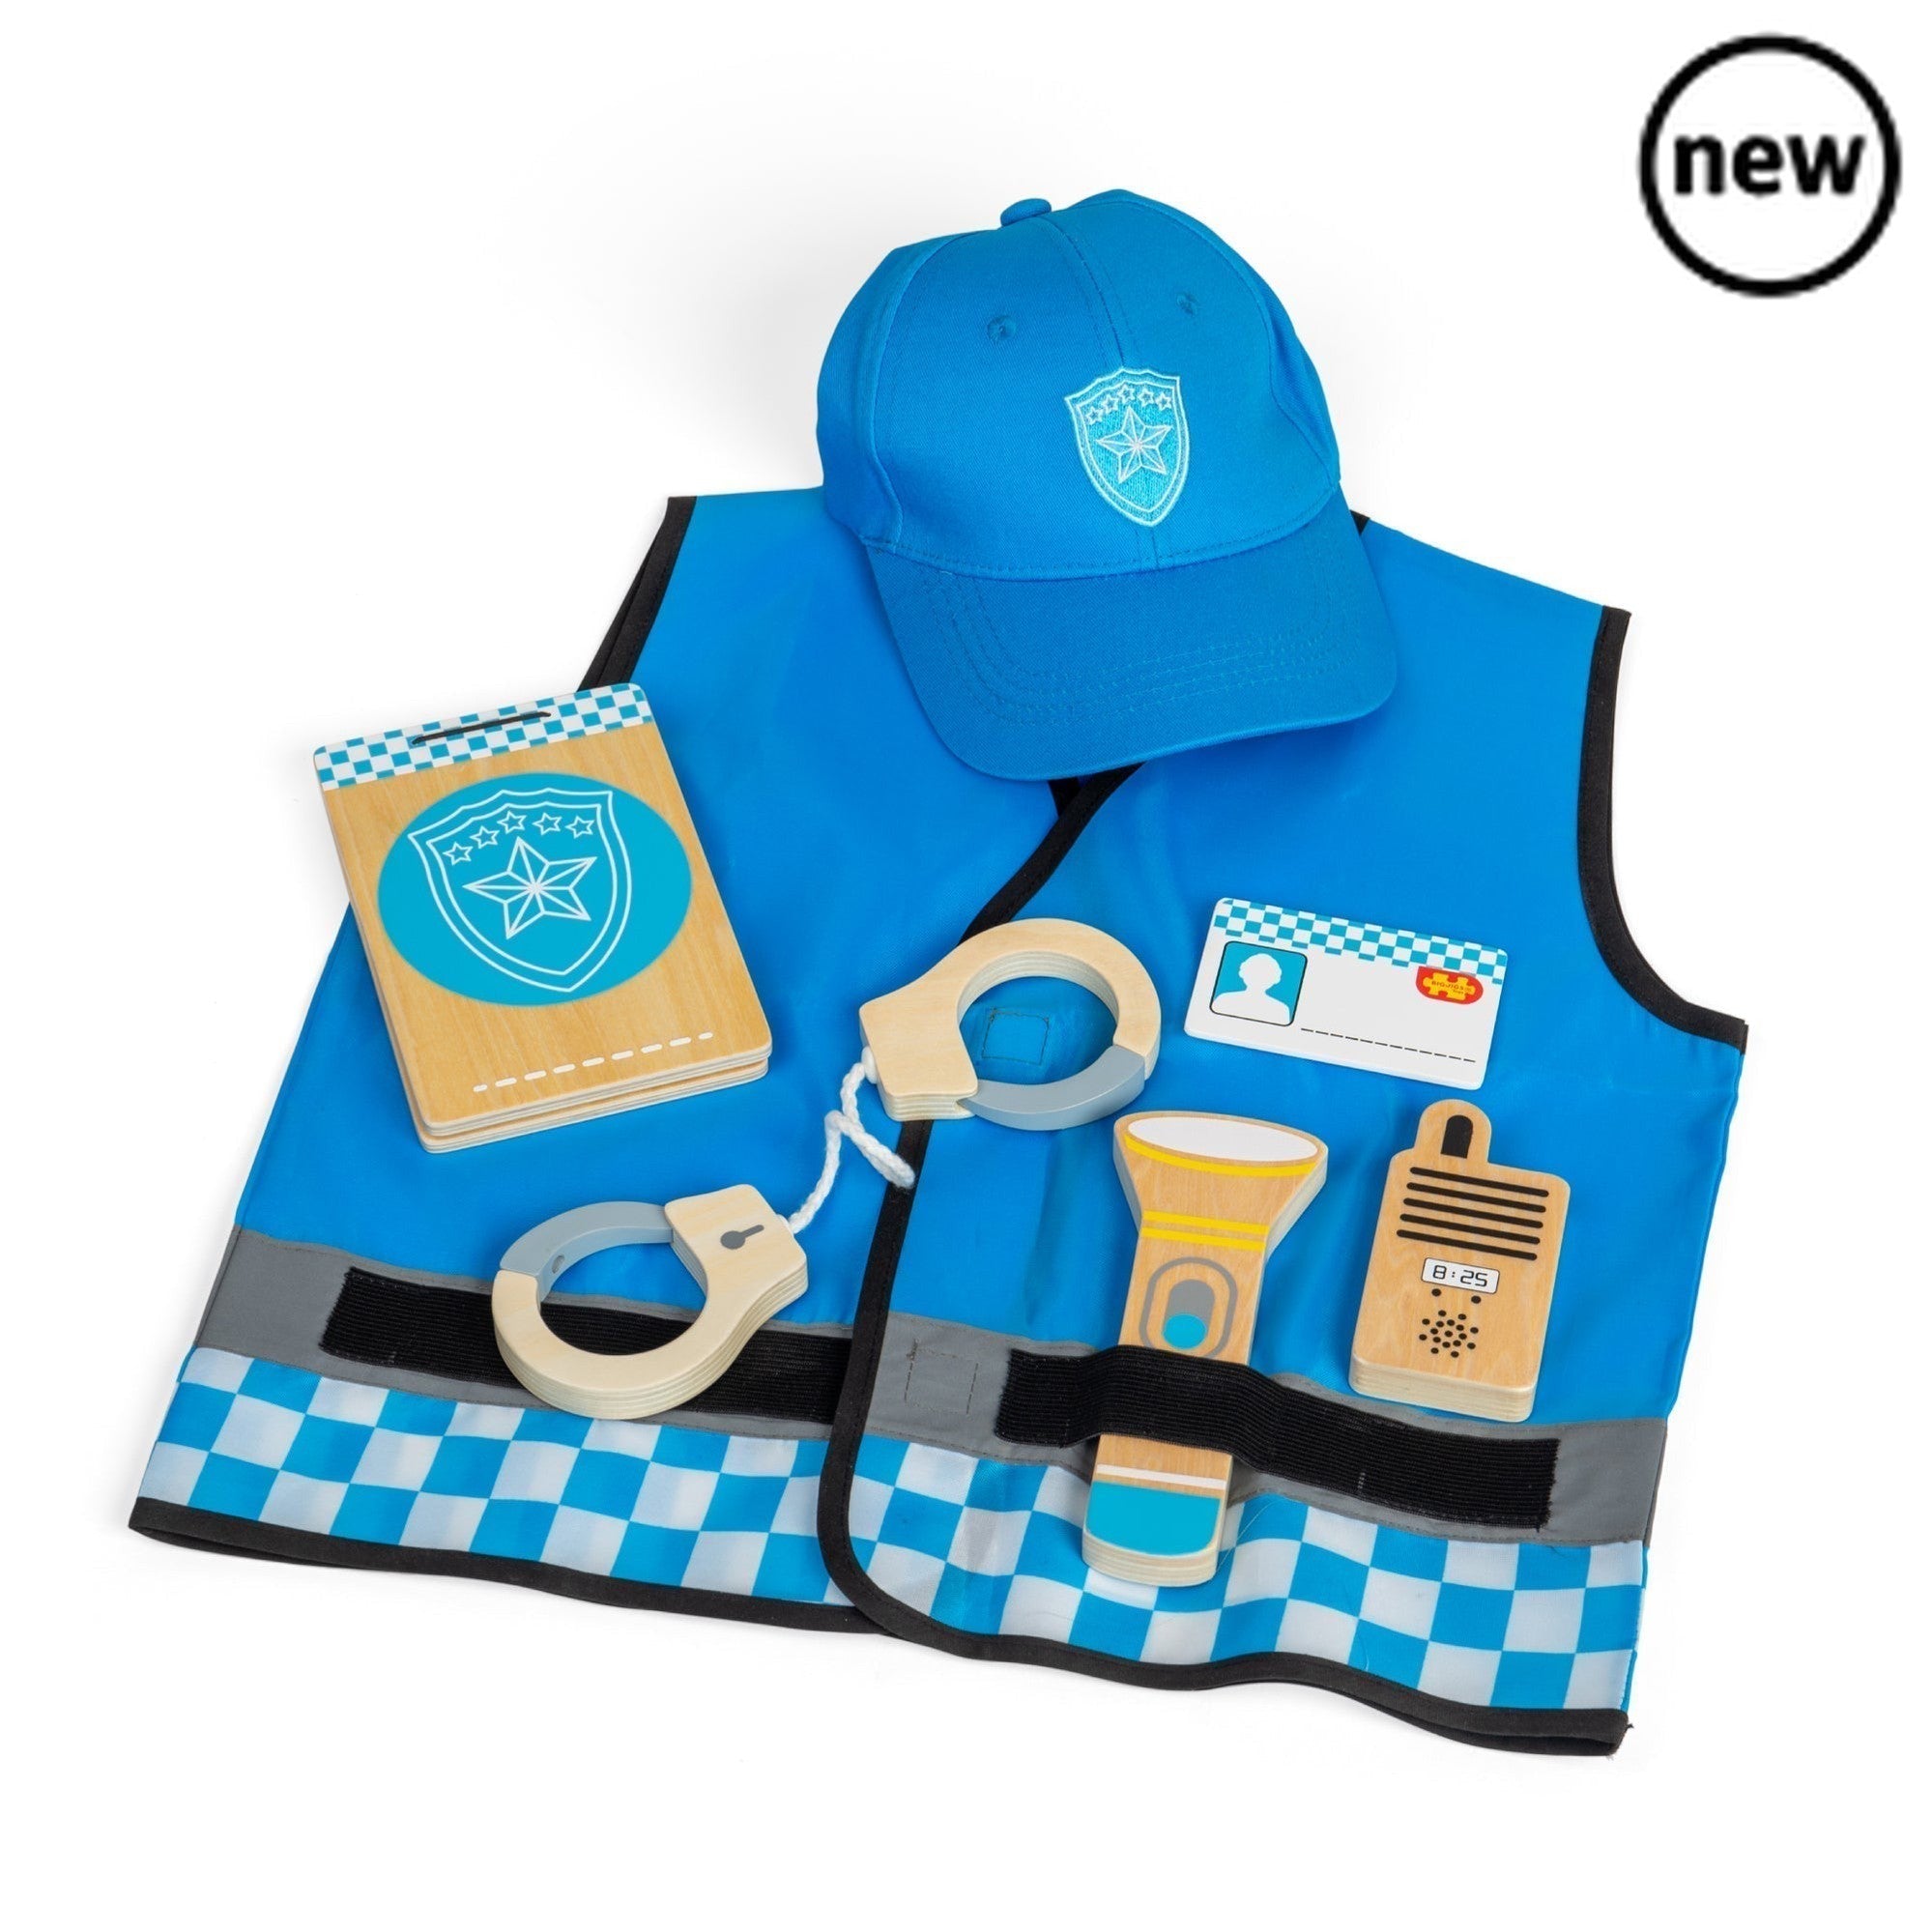 Police Dress Up Costume, Stop, Police! You’re under arrest! Save the public from the baddies with this fun Police Kids Fancy Dress Costume. Our police officer dress up set comes with a blue police officer vest, baseball cap, wooden walkie talkie, ID badge, ID wallet, a torch and hand cuffs. Our kids dress up costumes are suitable for ages 3-5 years. Jacket measures 40.5cm W x 44cm H. Adjustable hat measures 48cm-57cm. Dress up products have been tested to the latest EN71 & REACH regulations. Police Dress Up